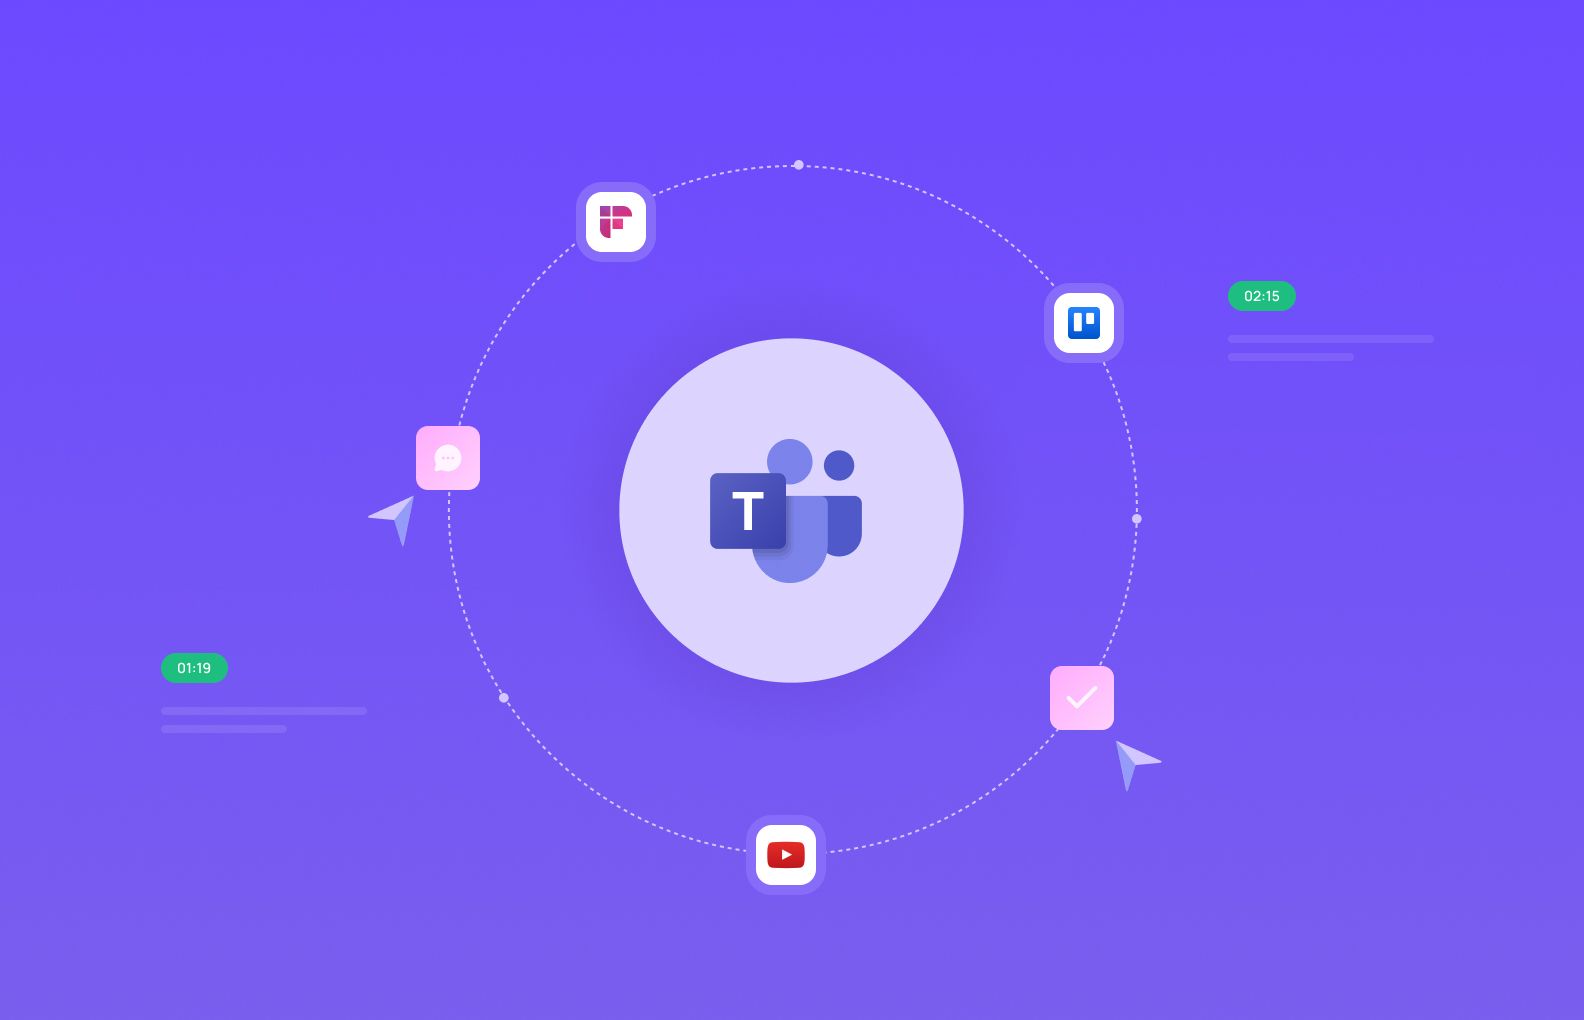 https://fireflies.ai/blog/content/images/2022/12/Microsoft-Teams-Add-Ons-to-Boost-Collaboration.jpg